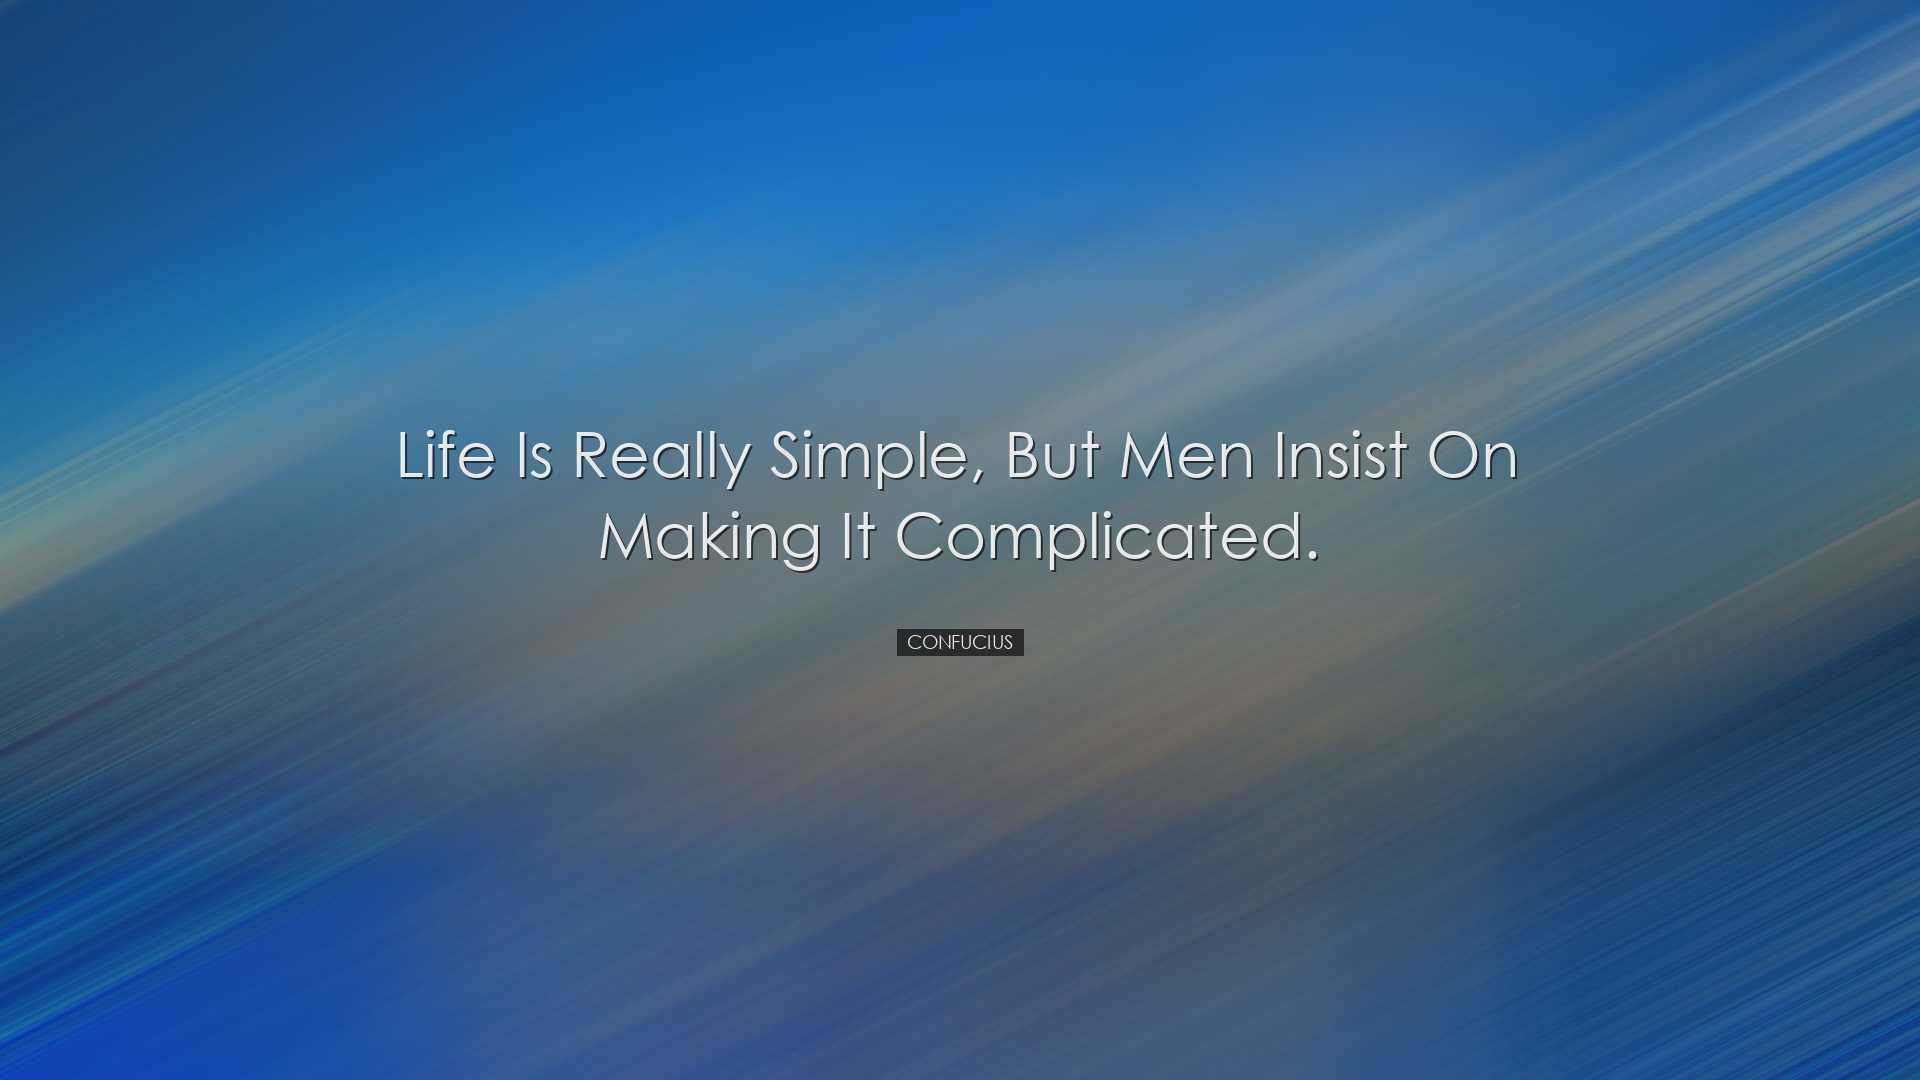 Life is really simple, but men insist on making it complicated. -